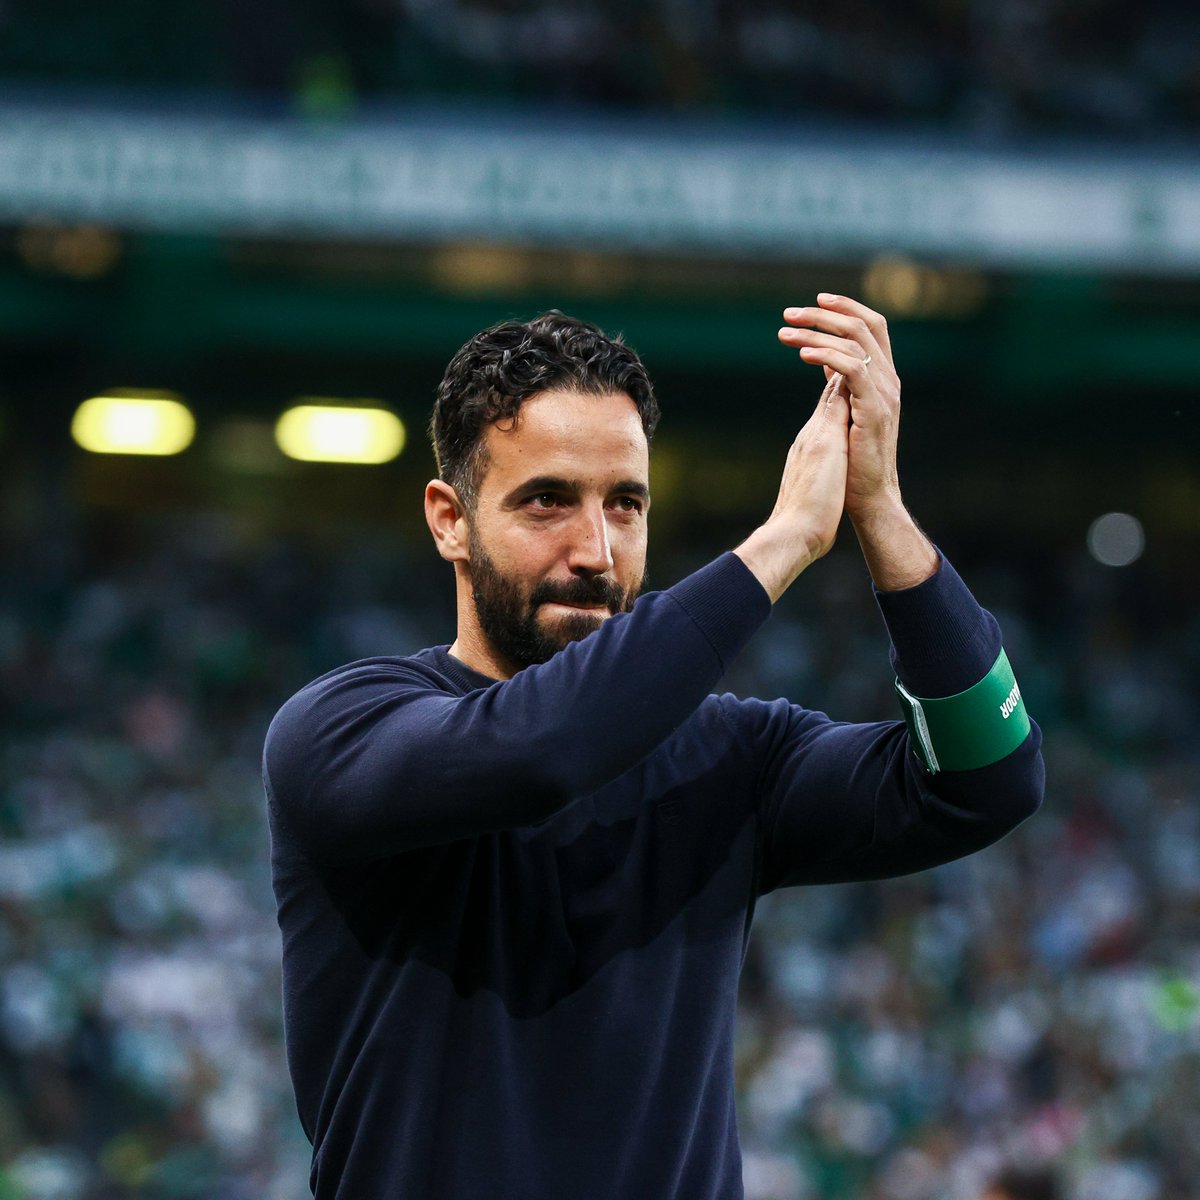 🚨 Rúben Amorim has announced he will remain at Sporting Lisbon next season after leading the club to Liga Portugal success.

(Source: @MailSport)